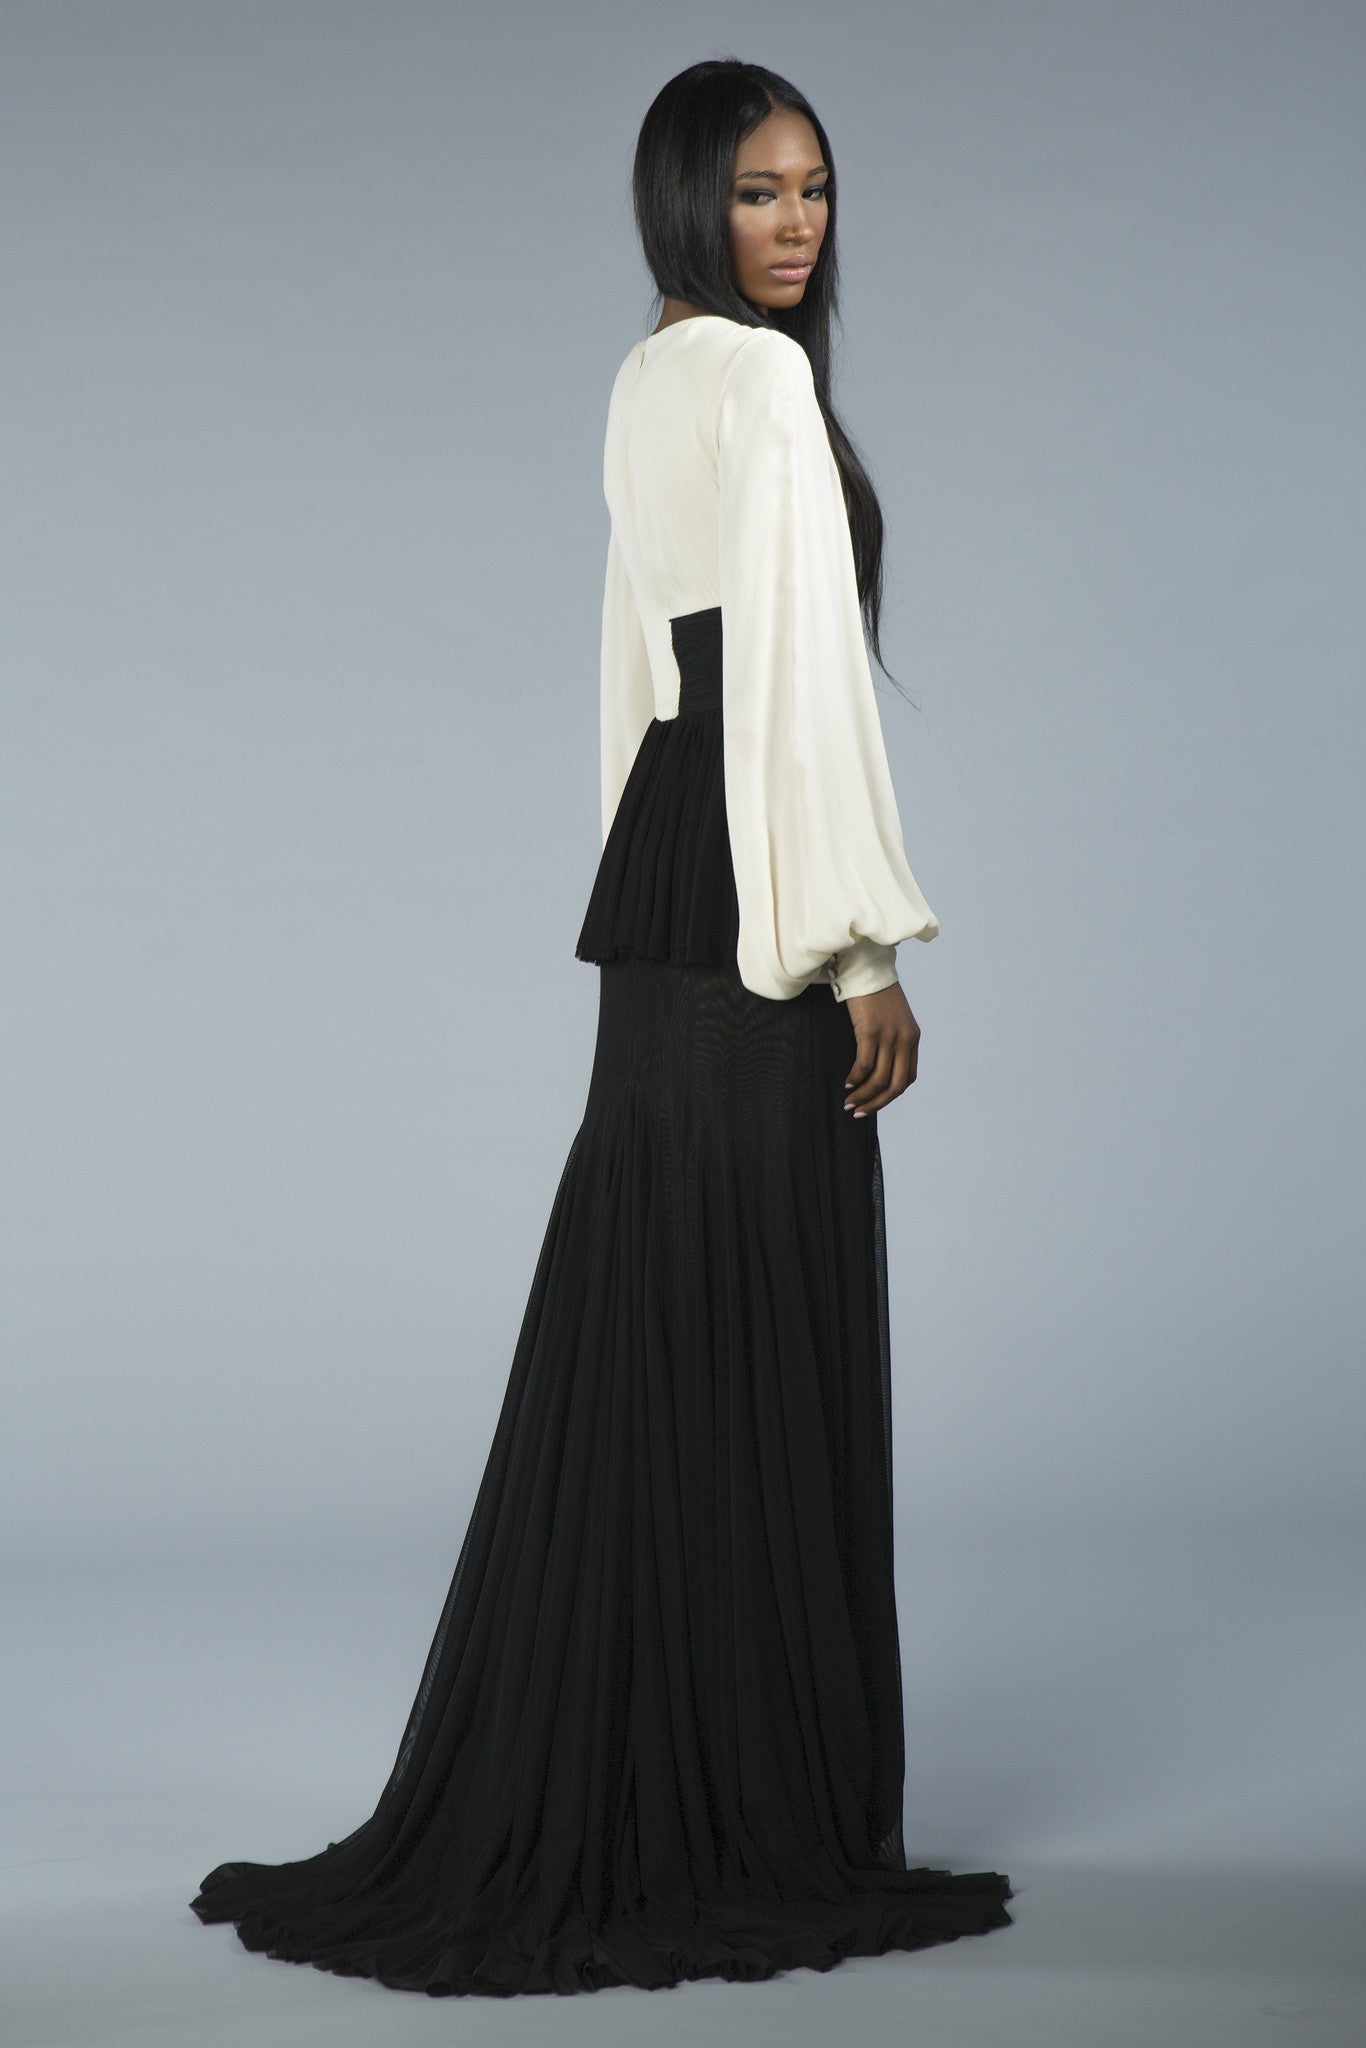  Silk and nylon mesh black and white modest bridal or evening wear long and elegant peplum gown  